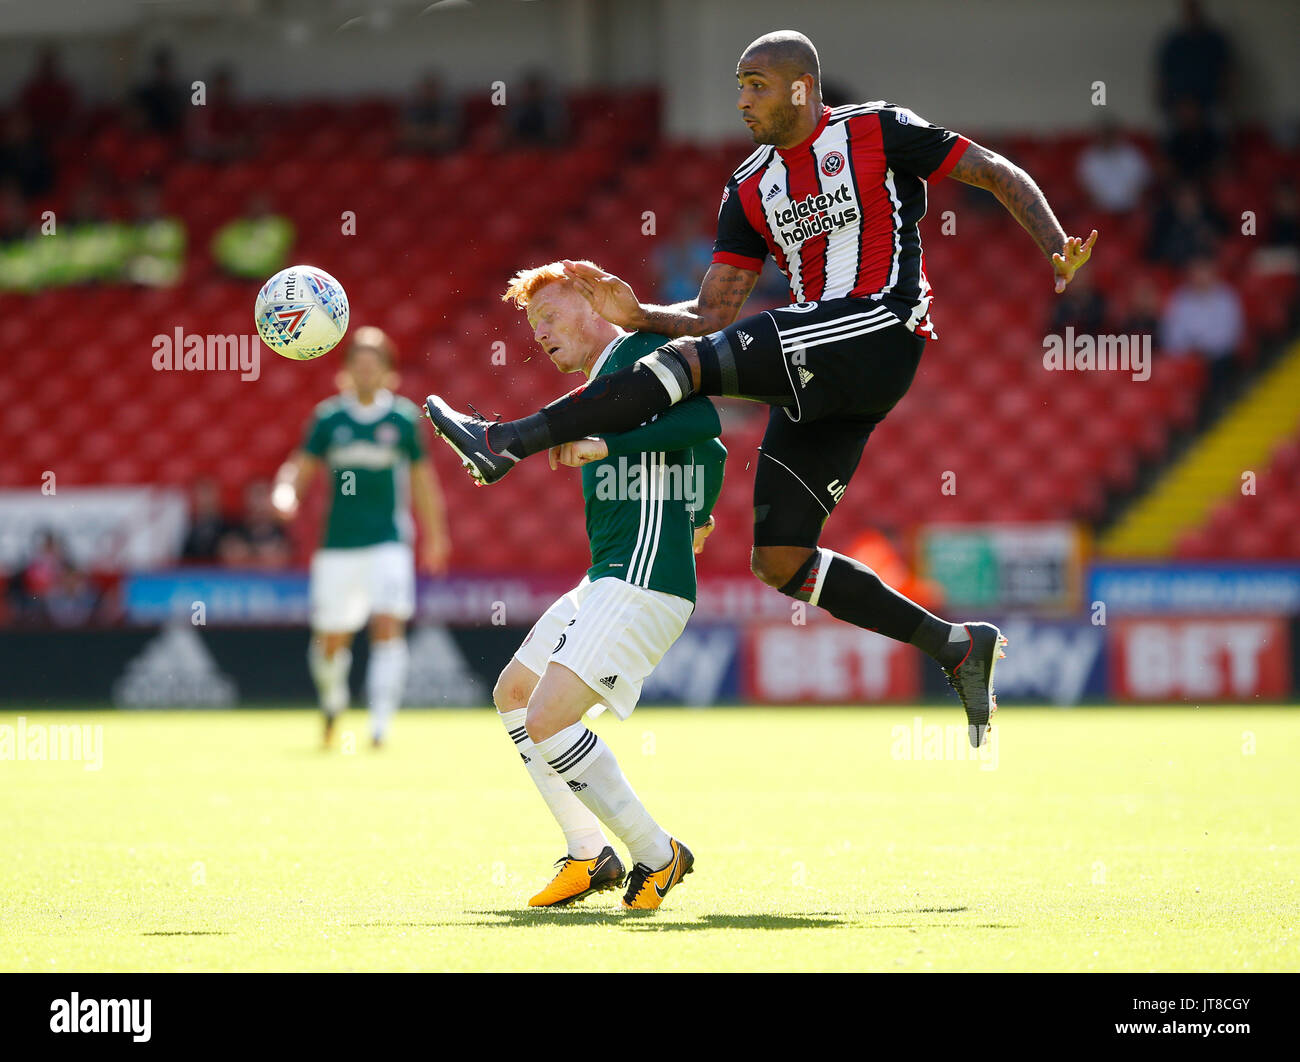 August 5, 2017 - Sheffield, United Kingdom - Leon Clarke of Sheffield Utd leaps above Ryan Woods of Brentford during the English Championship League match at Bramall Lane Stadium, Sheffield. Picture date: August 5th 2017. Pic credit should read: Simon Bellis/Sportimage/CSM Stock Photo